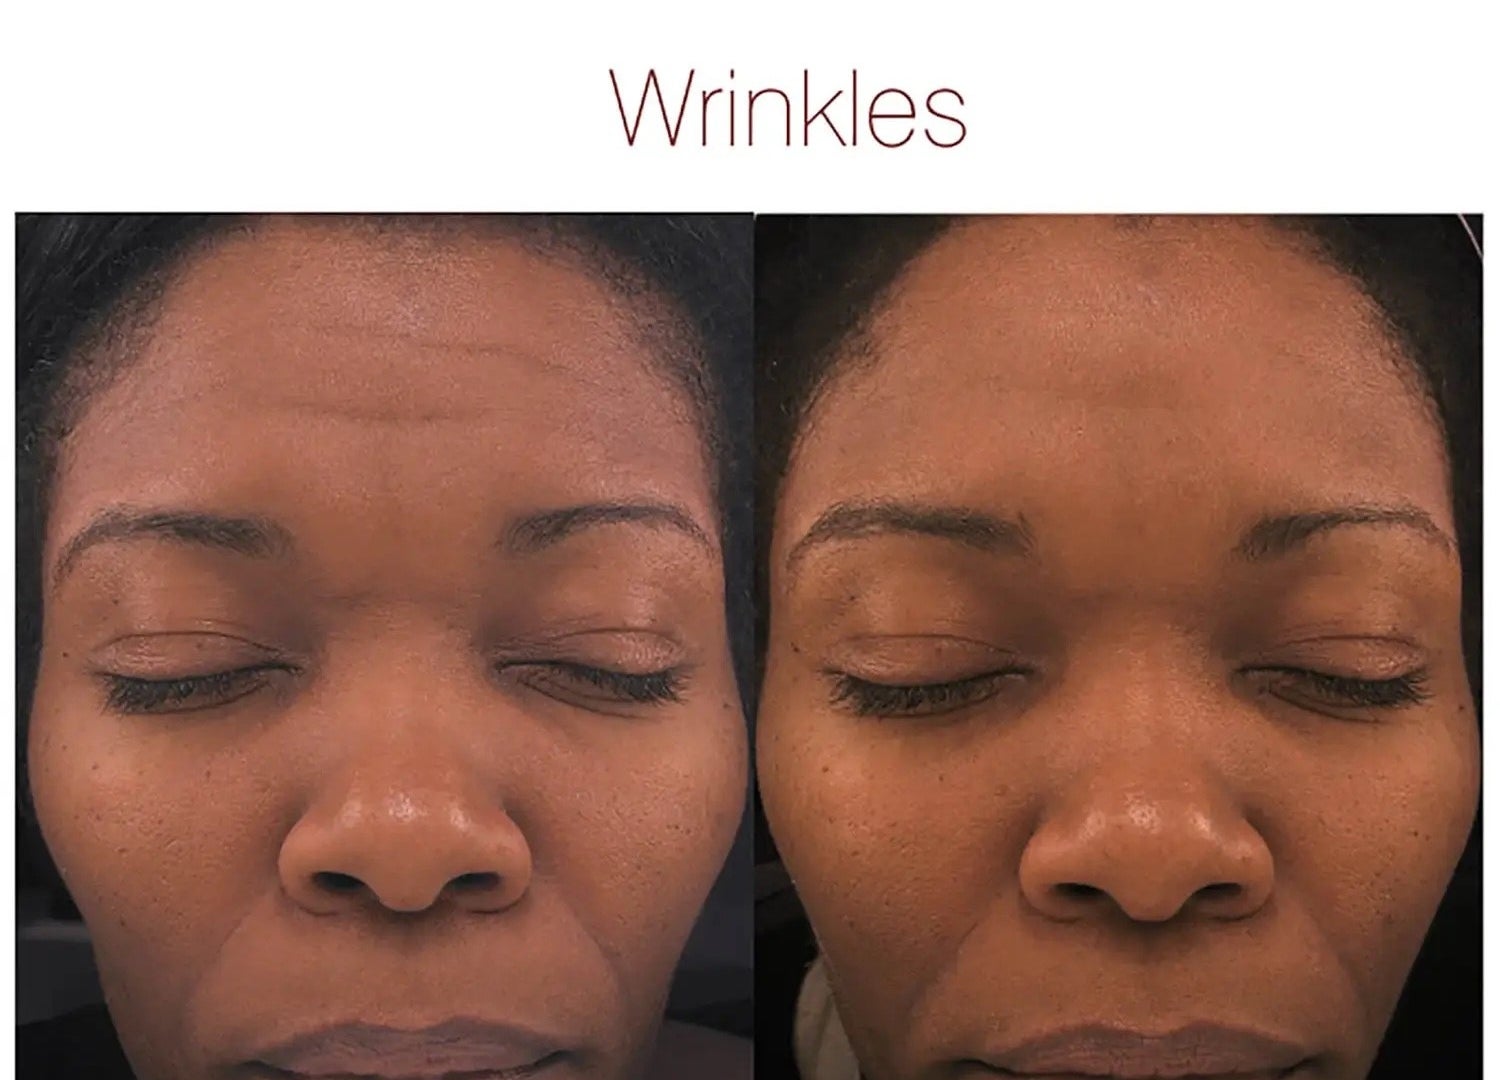 before of person with dull skin and some wrinkles, then after 8 weeks later of their skin looking brighter and wrinkles less noticeable